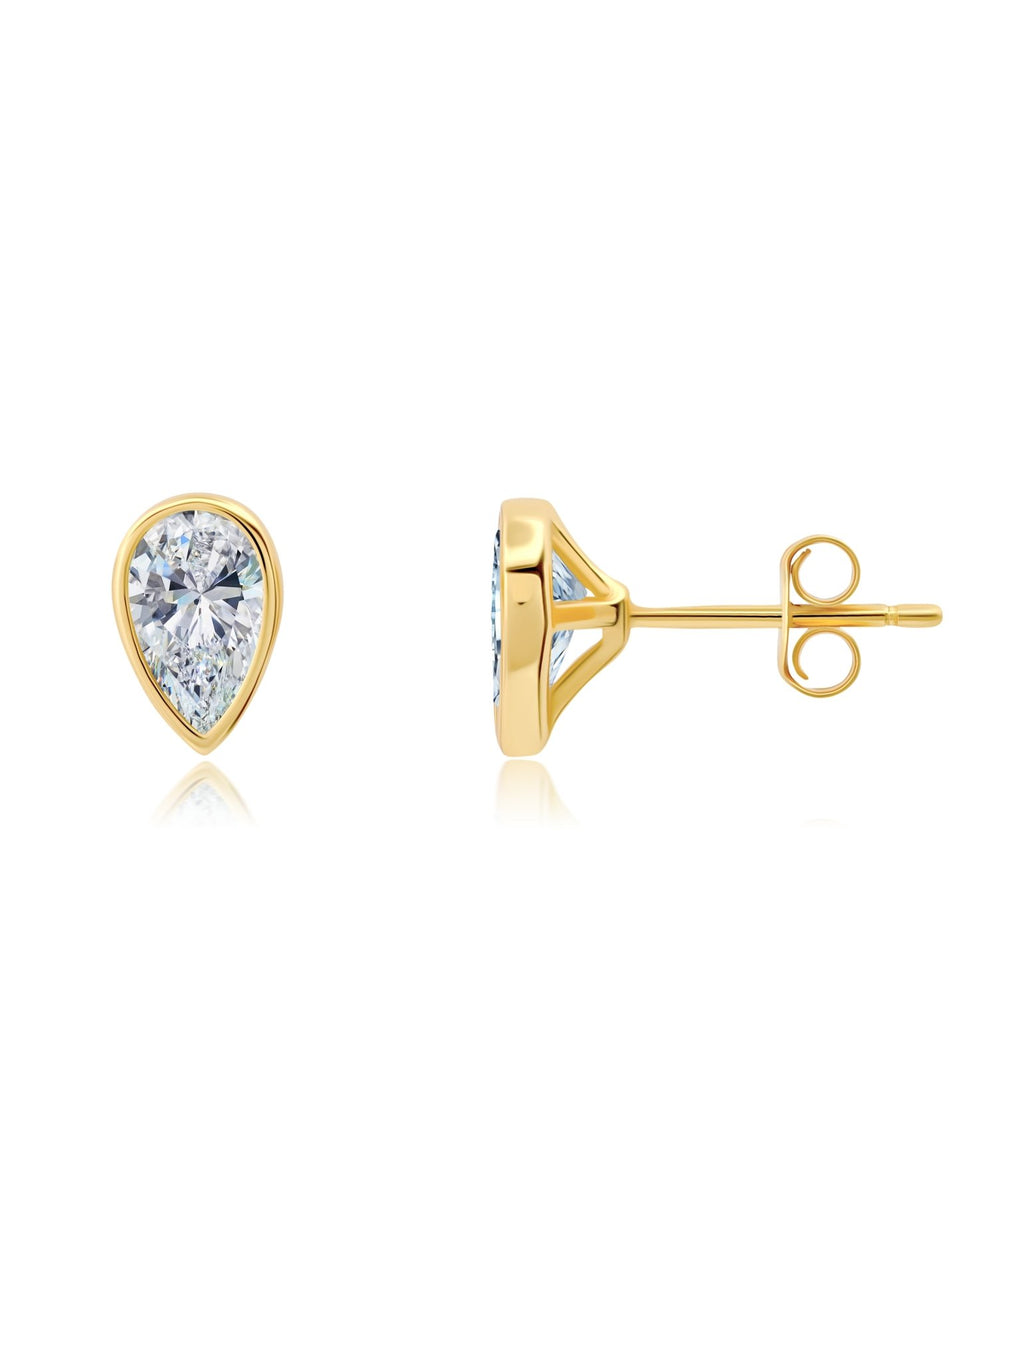 Solitaire Bezel Set Pear Stud Earrings Finished In 18Kt Yellow Gold